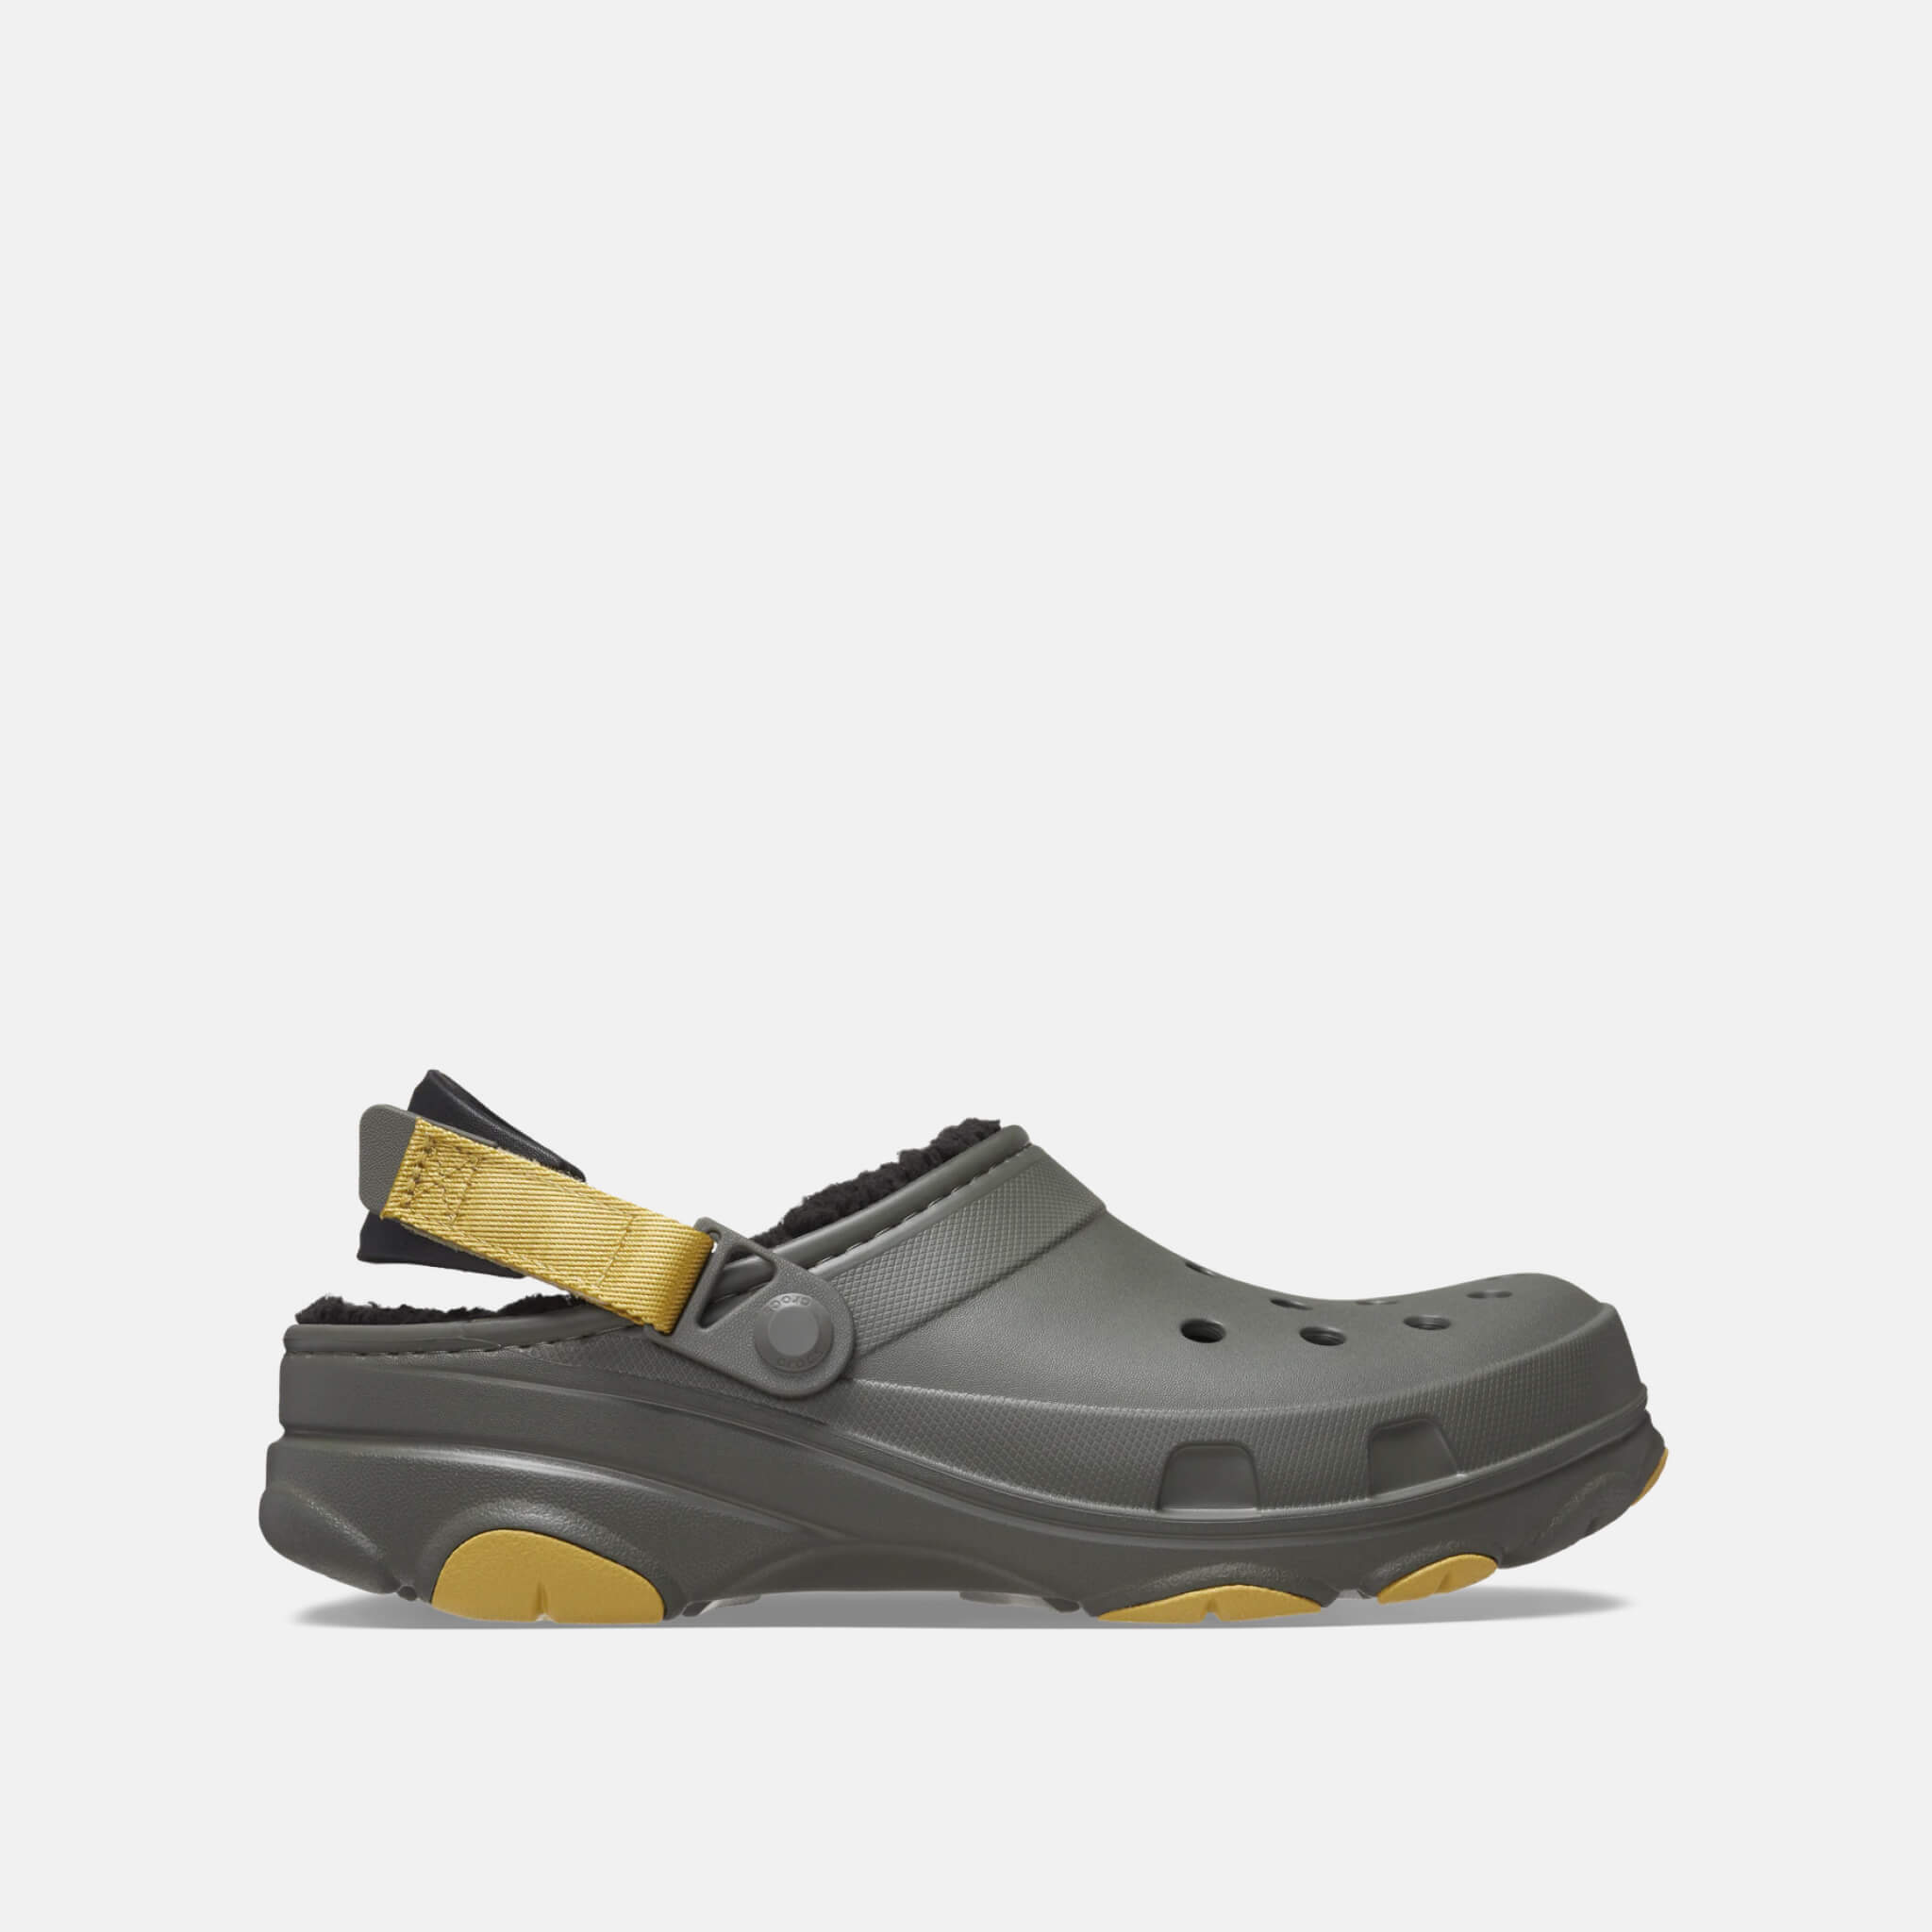 All Terrain Lined Clog Dusty Olive